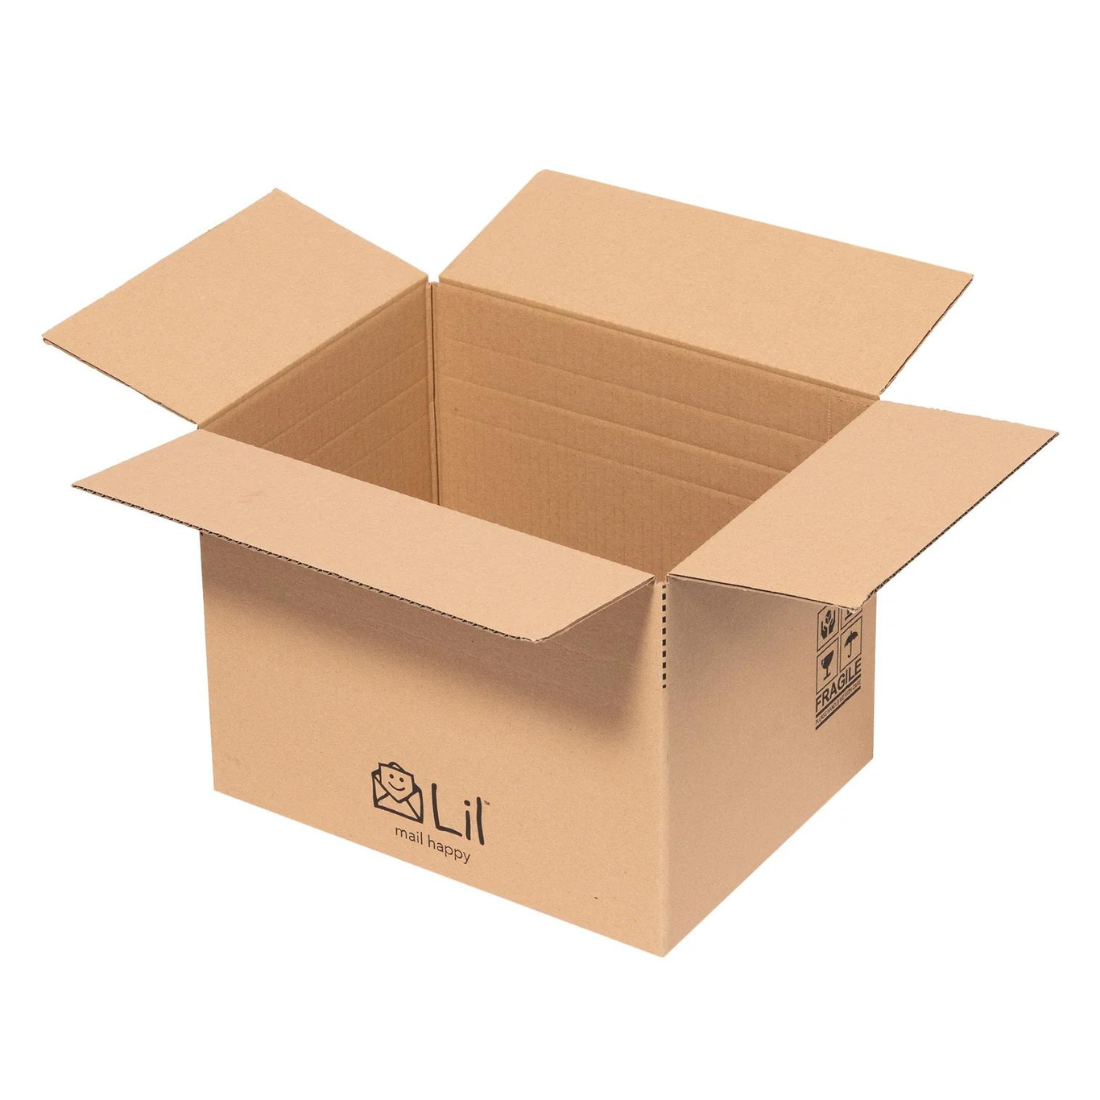 E3+ Single Walled Cardboard Box - Perfect aspackaging boxes (PACK OF 50)